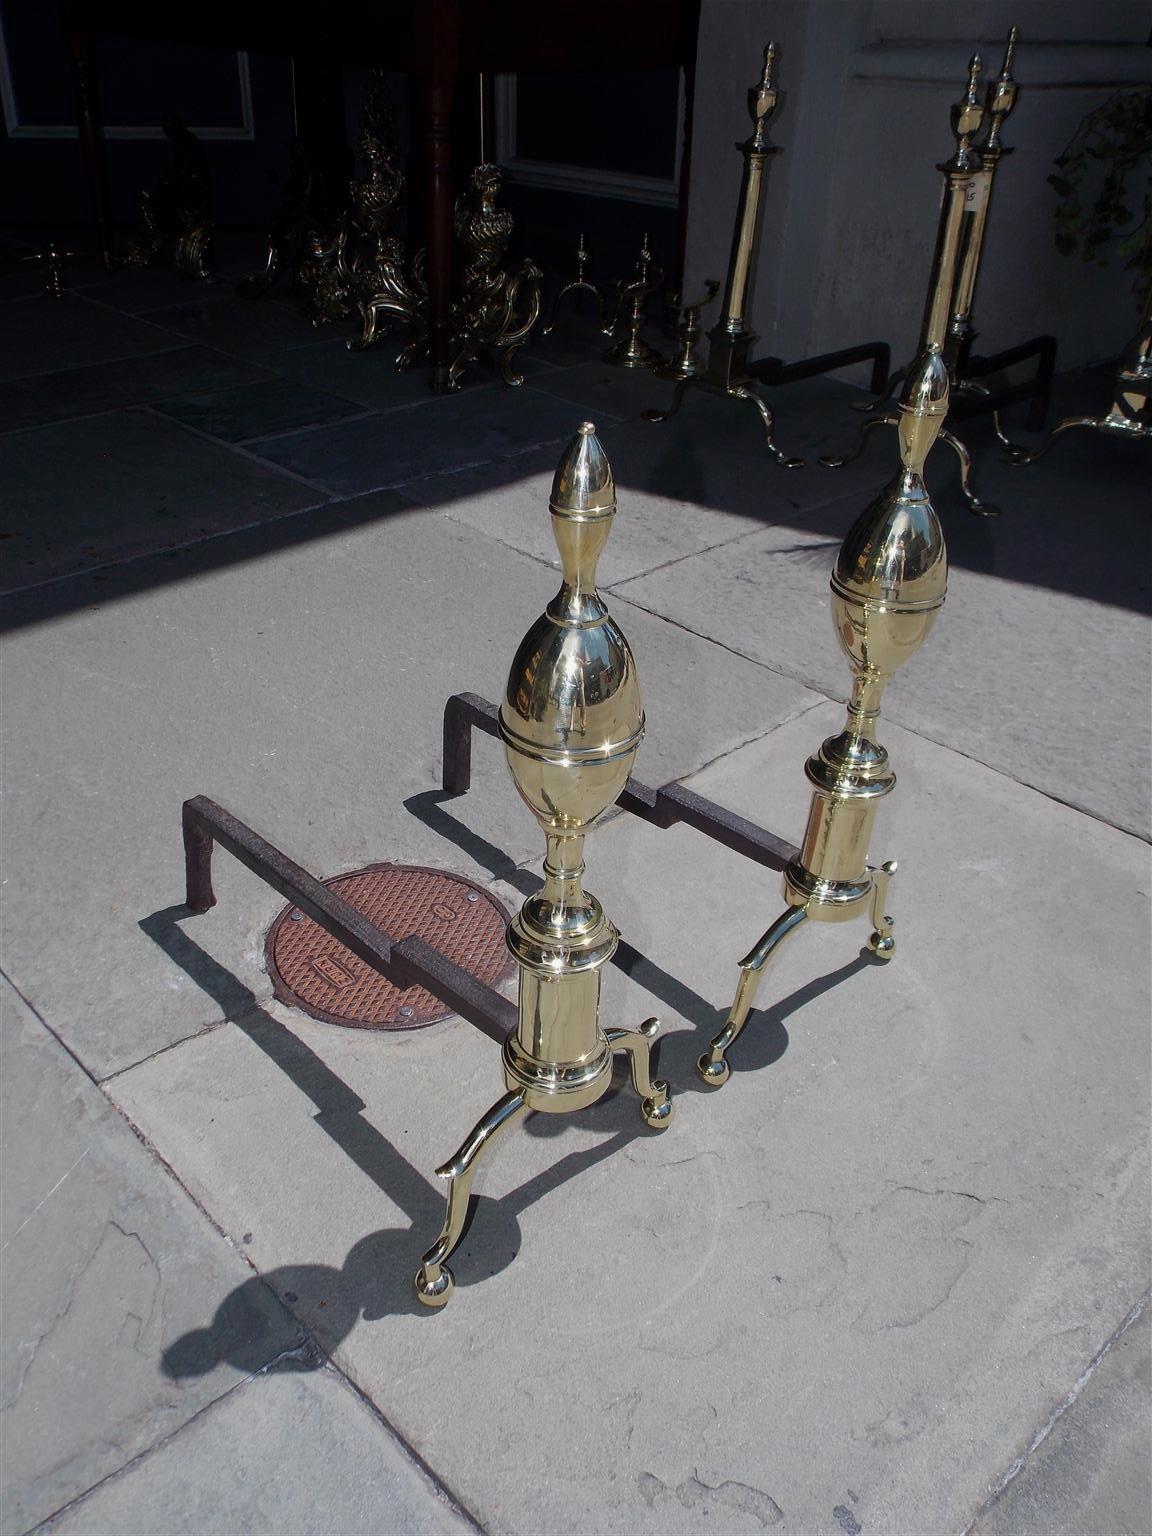 Pair of American brass and wrought iron lemon on lemon andirons with double lines of beading , circular turned round plinths, and terminating on spur legs with ball feet. Early 19th Century, N.Y.